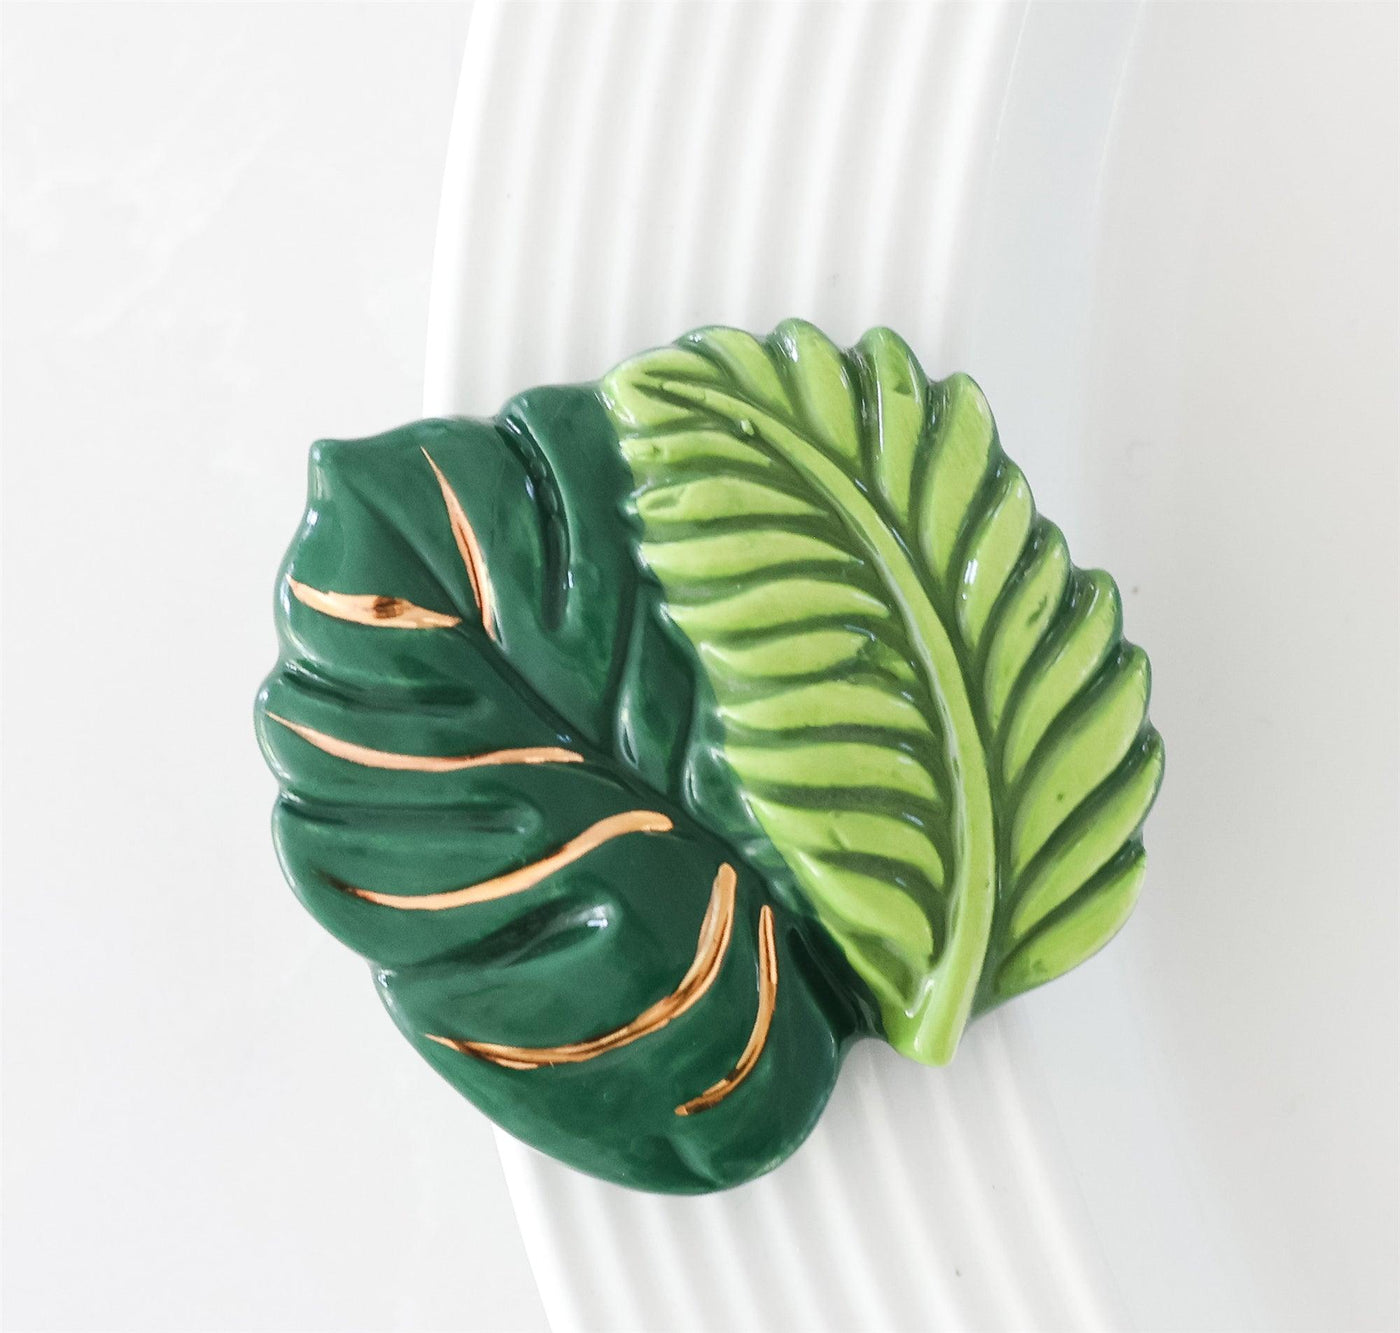 Dark green with gold accents fern leaf with a lime fern laid across it mini for a nora fleming dish